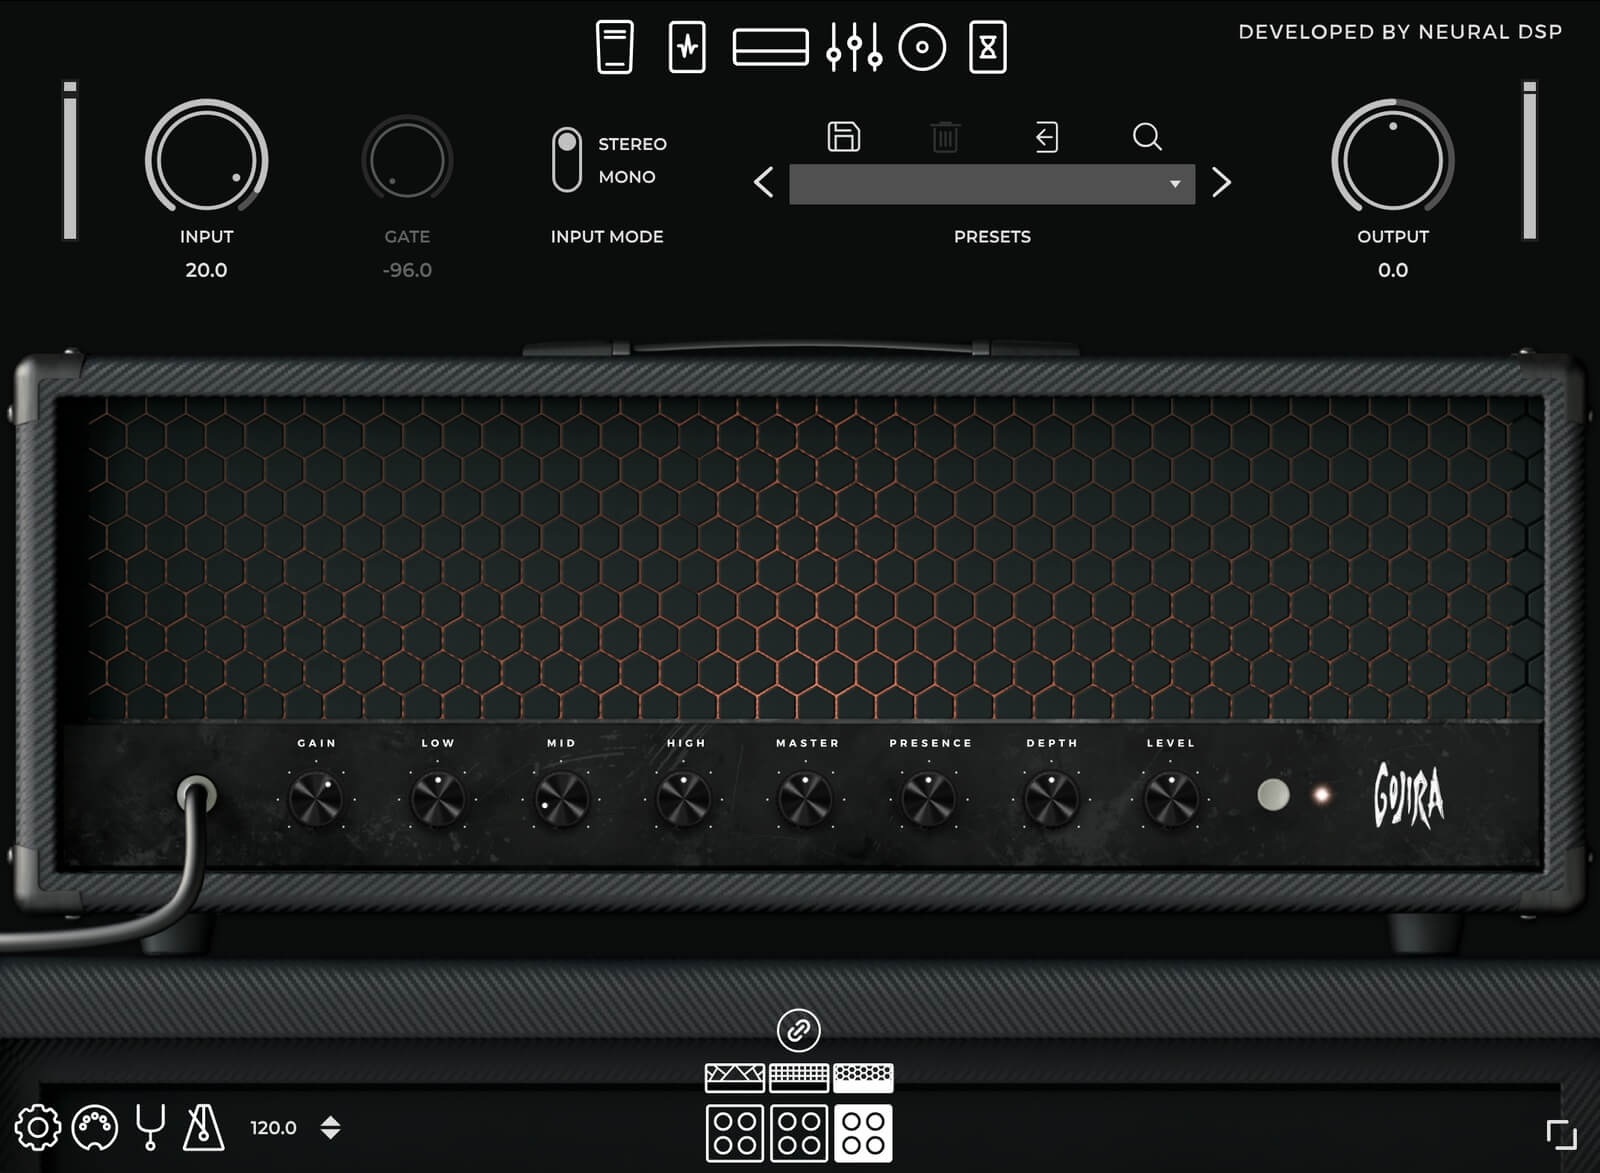 Best Neural Dsp Plugin Archetype Gojira: Guitar amplifier and effects suite by Neural DSP